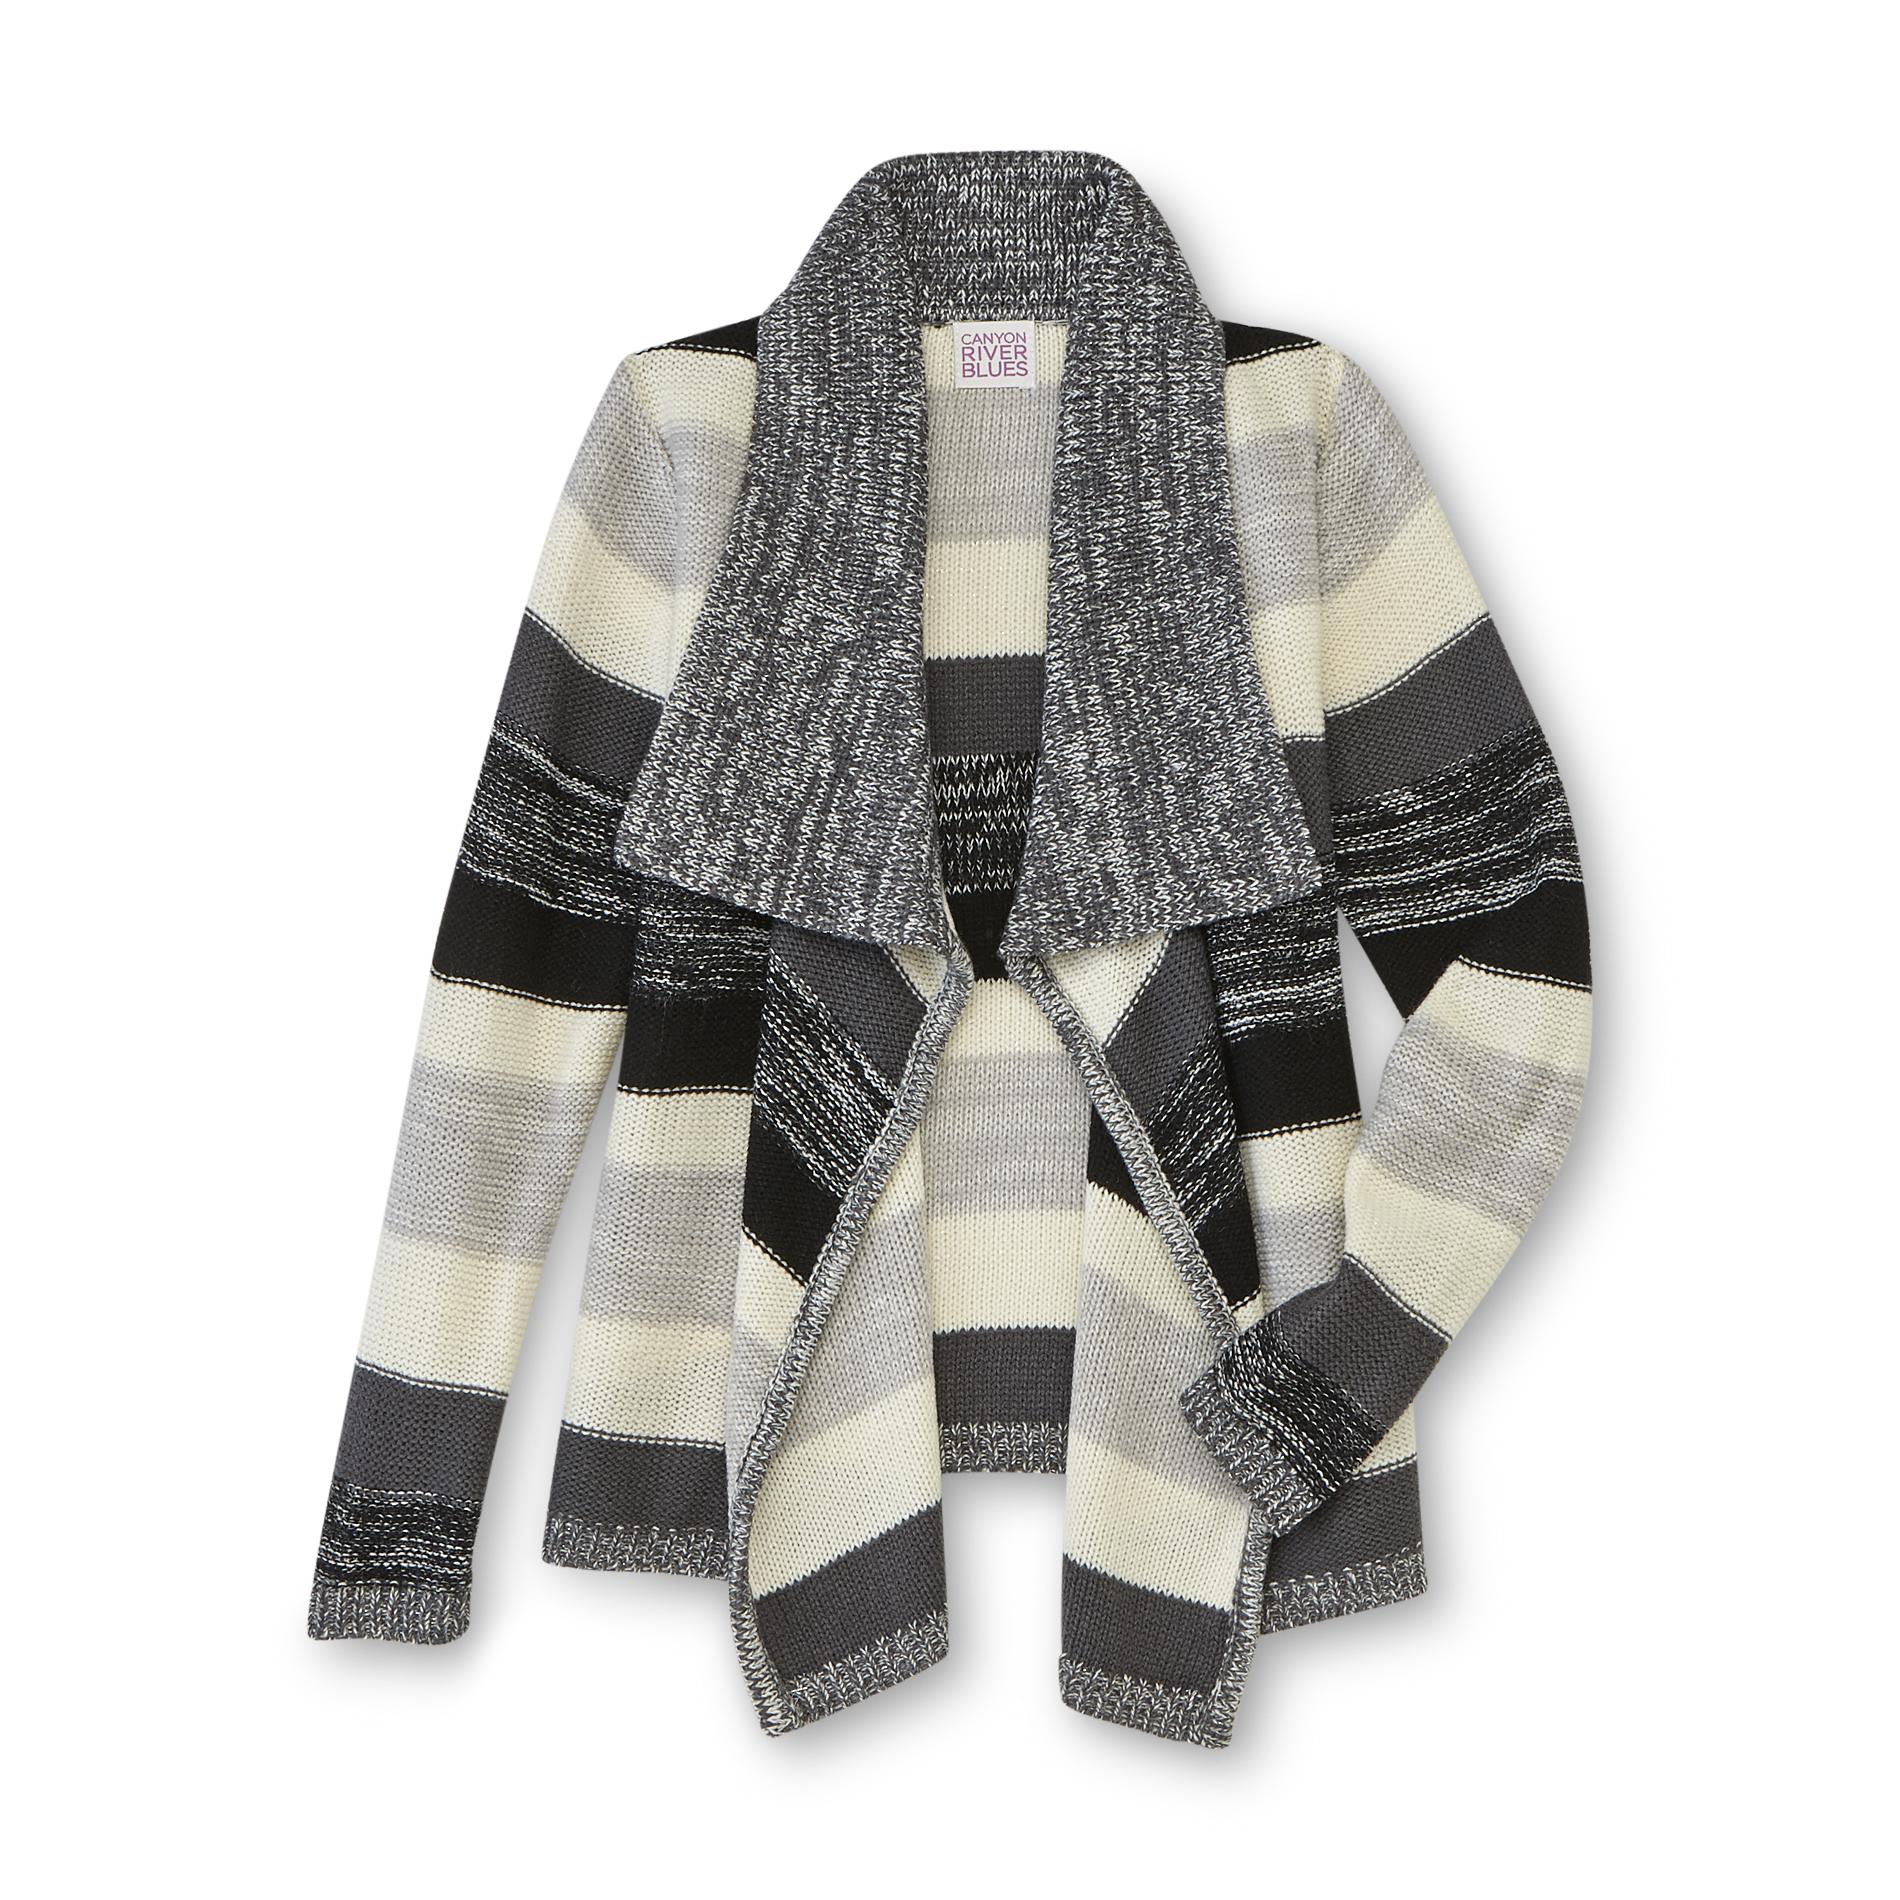 Canyon River Blues Girl's Open-Front Cardigan - Striped